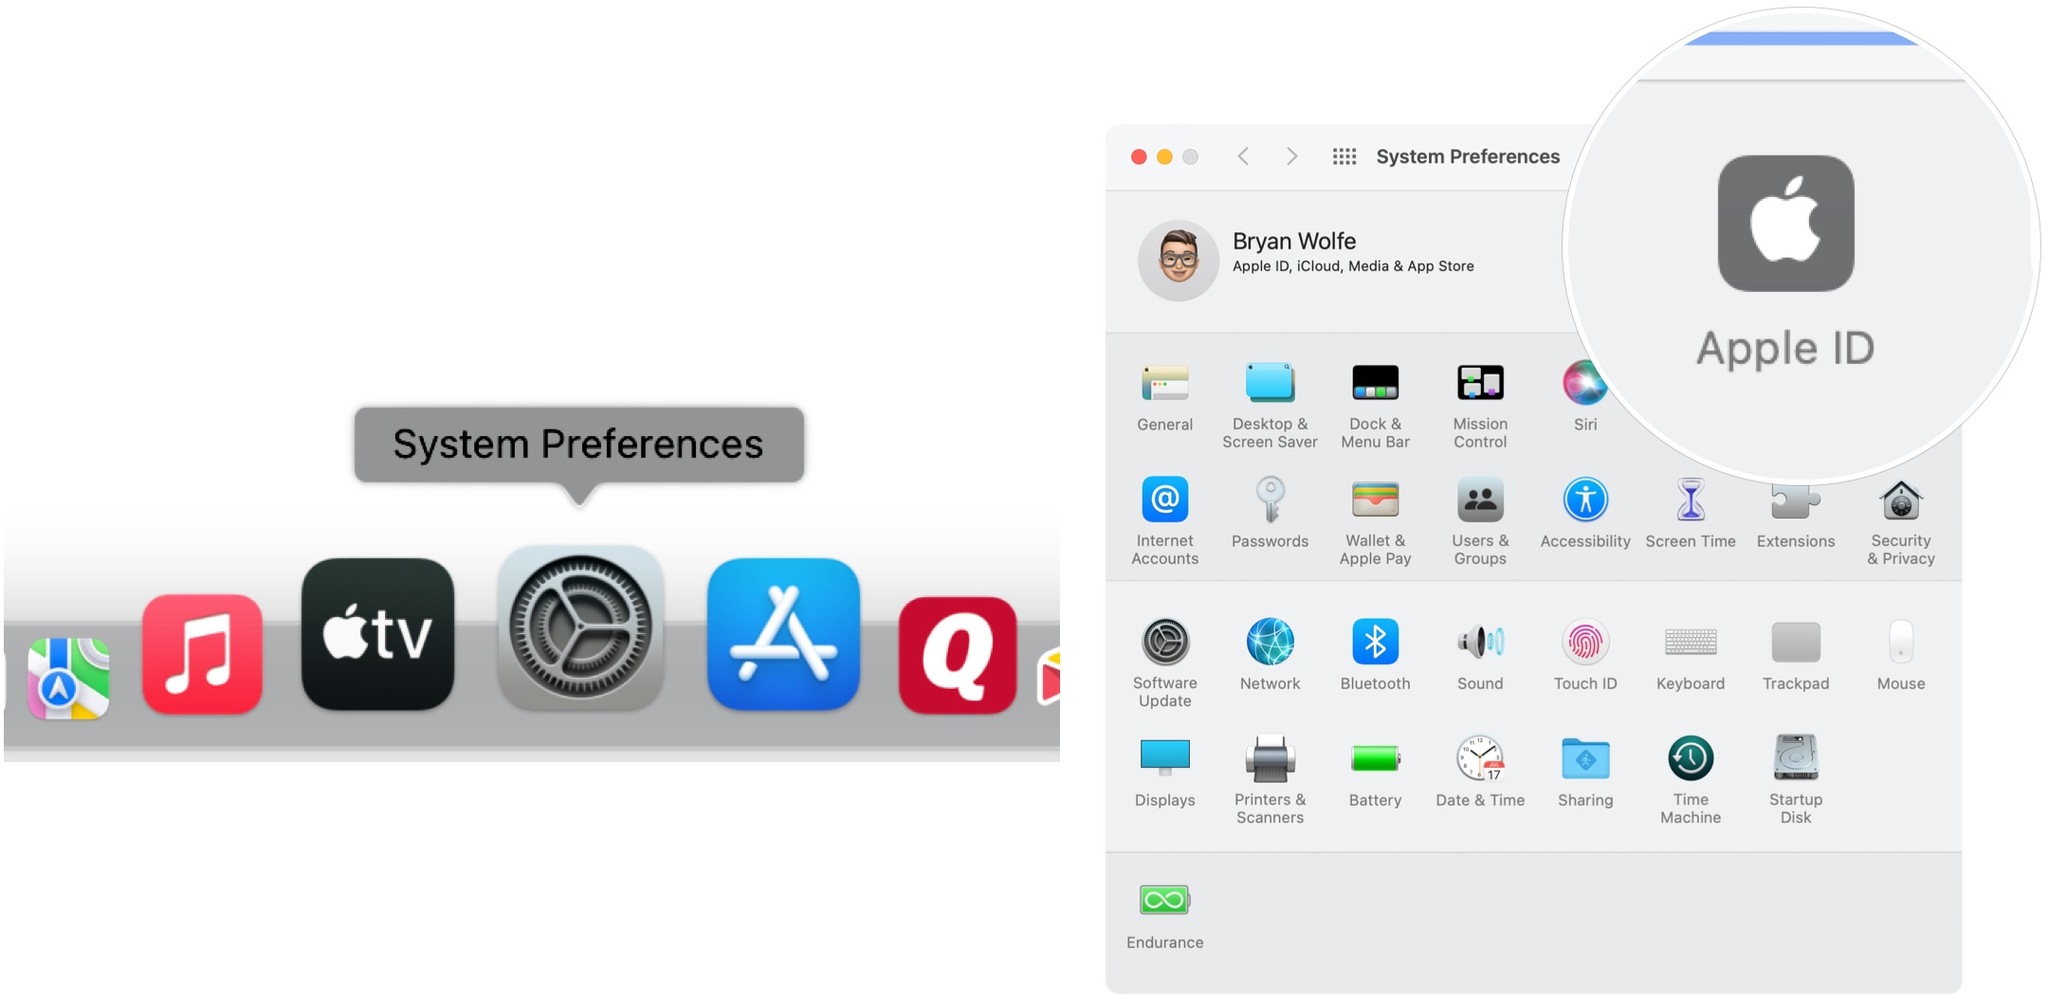 To sign out of your iCloud account, go into System Preferences, then click Apple ID.